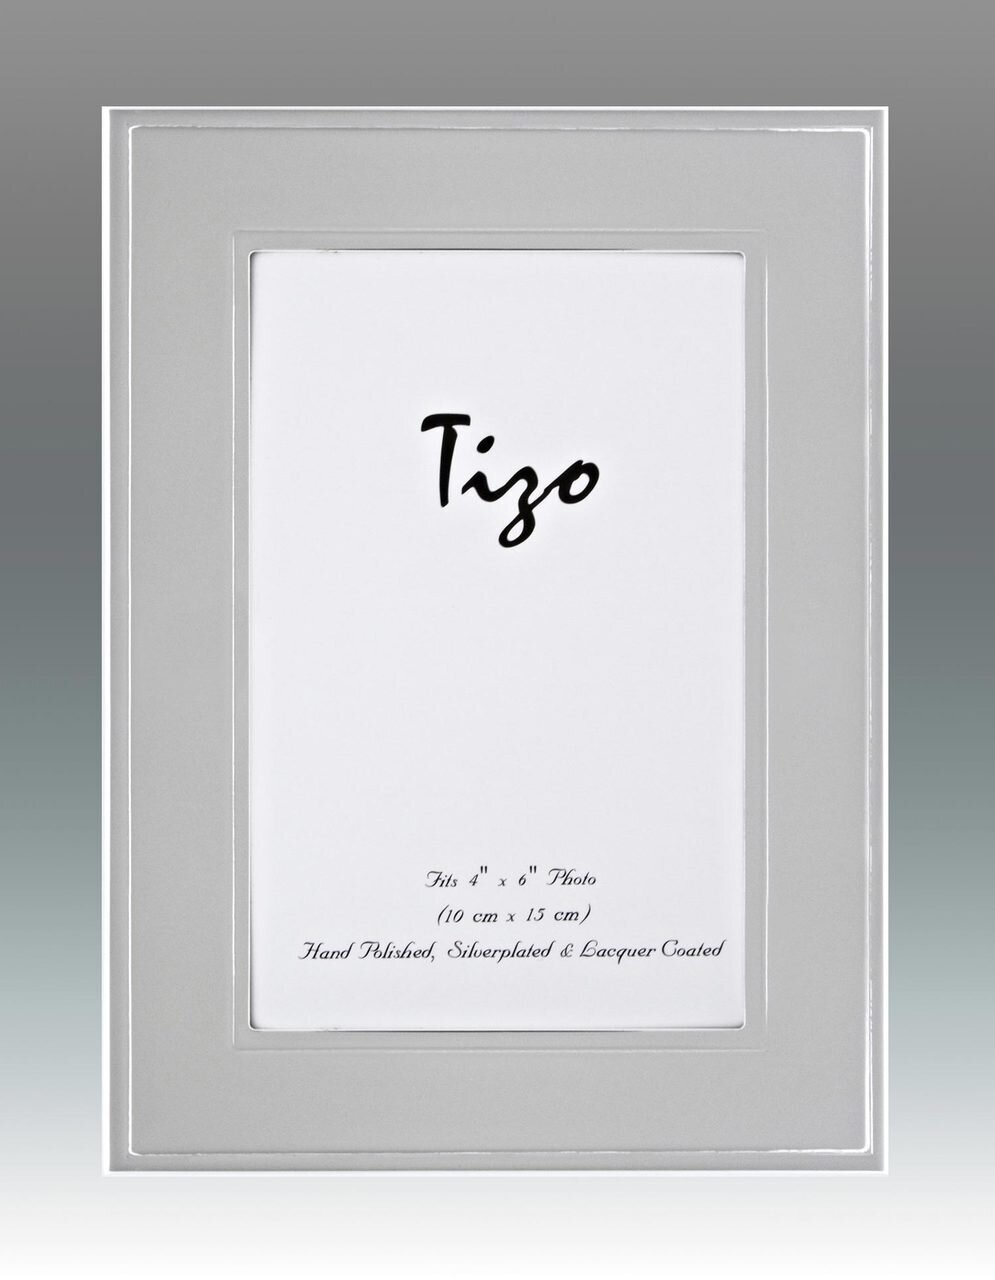 Tizo 4 x 6 Inch Tabloid Silver-plated Picture Frame